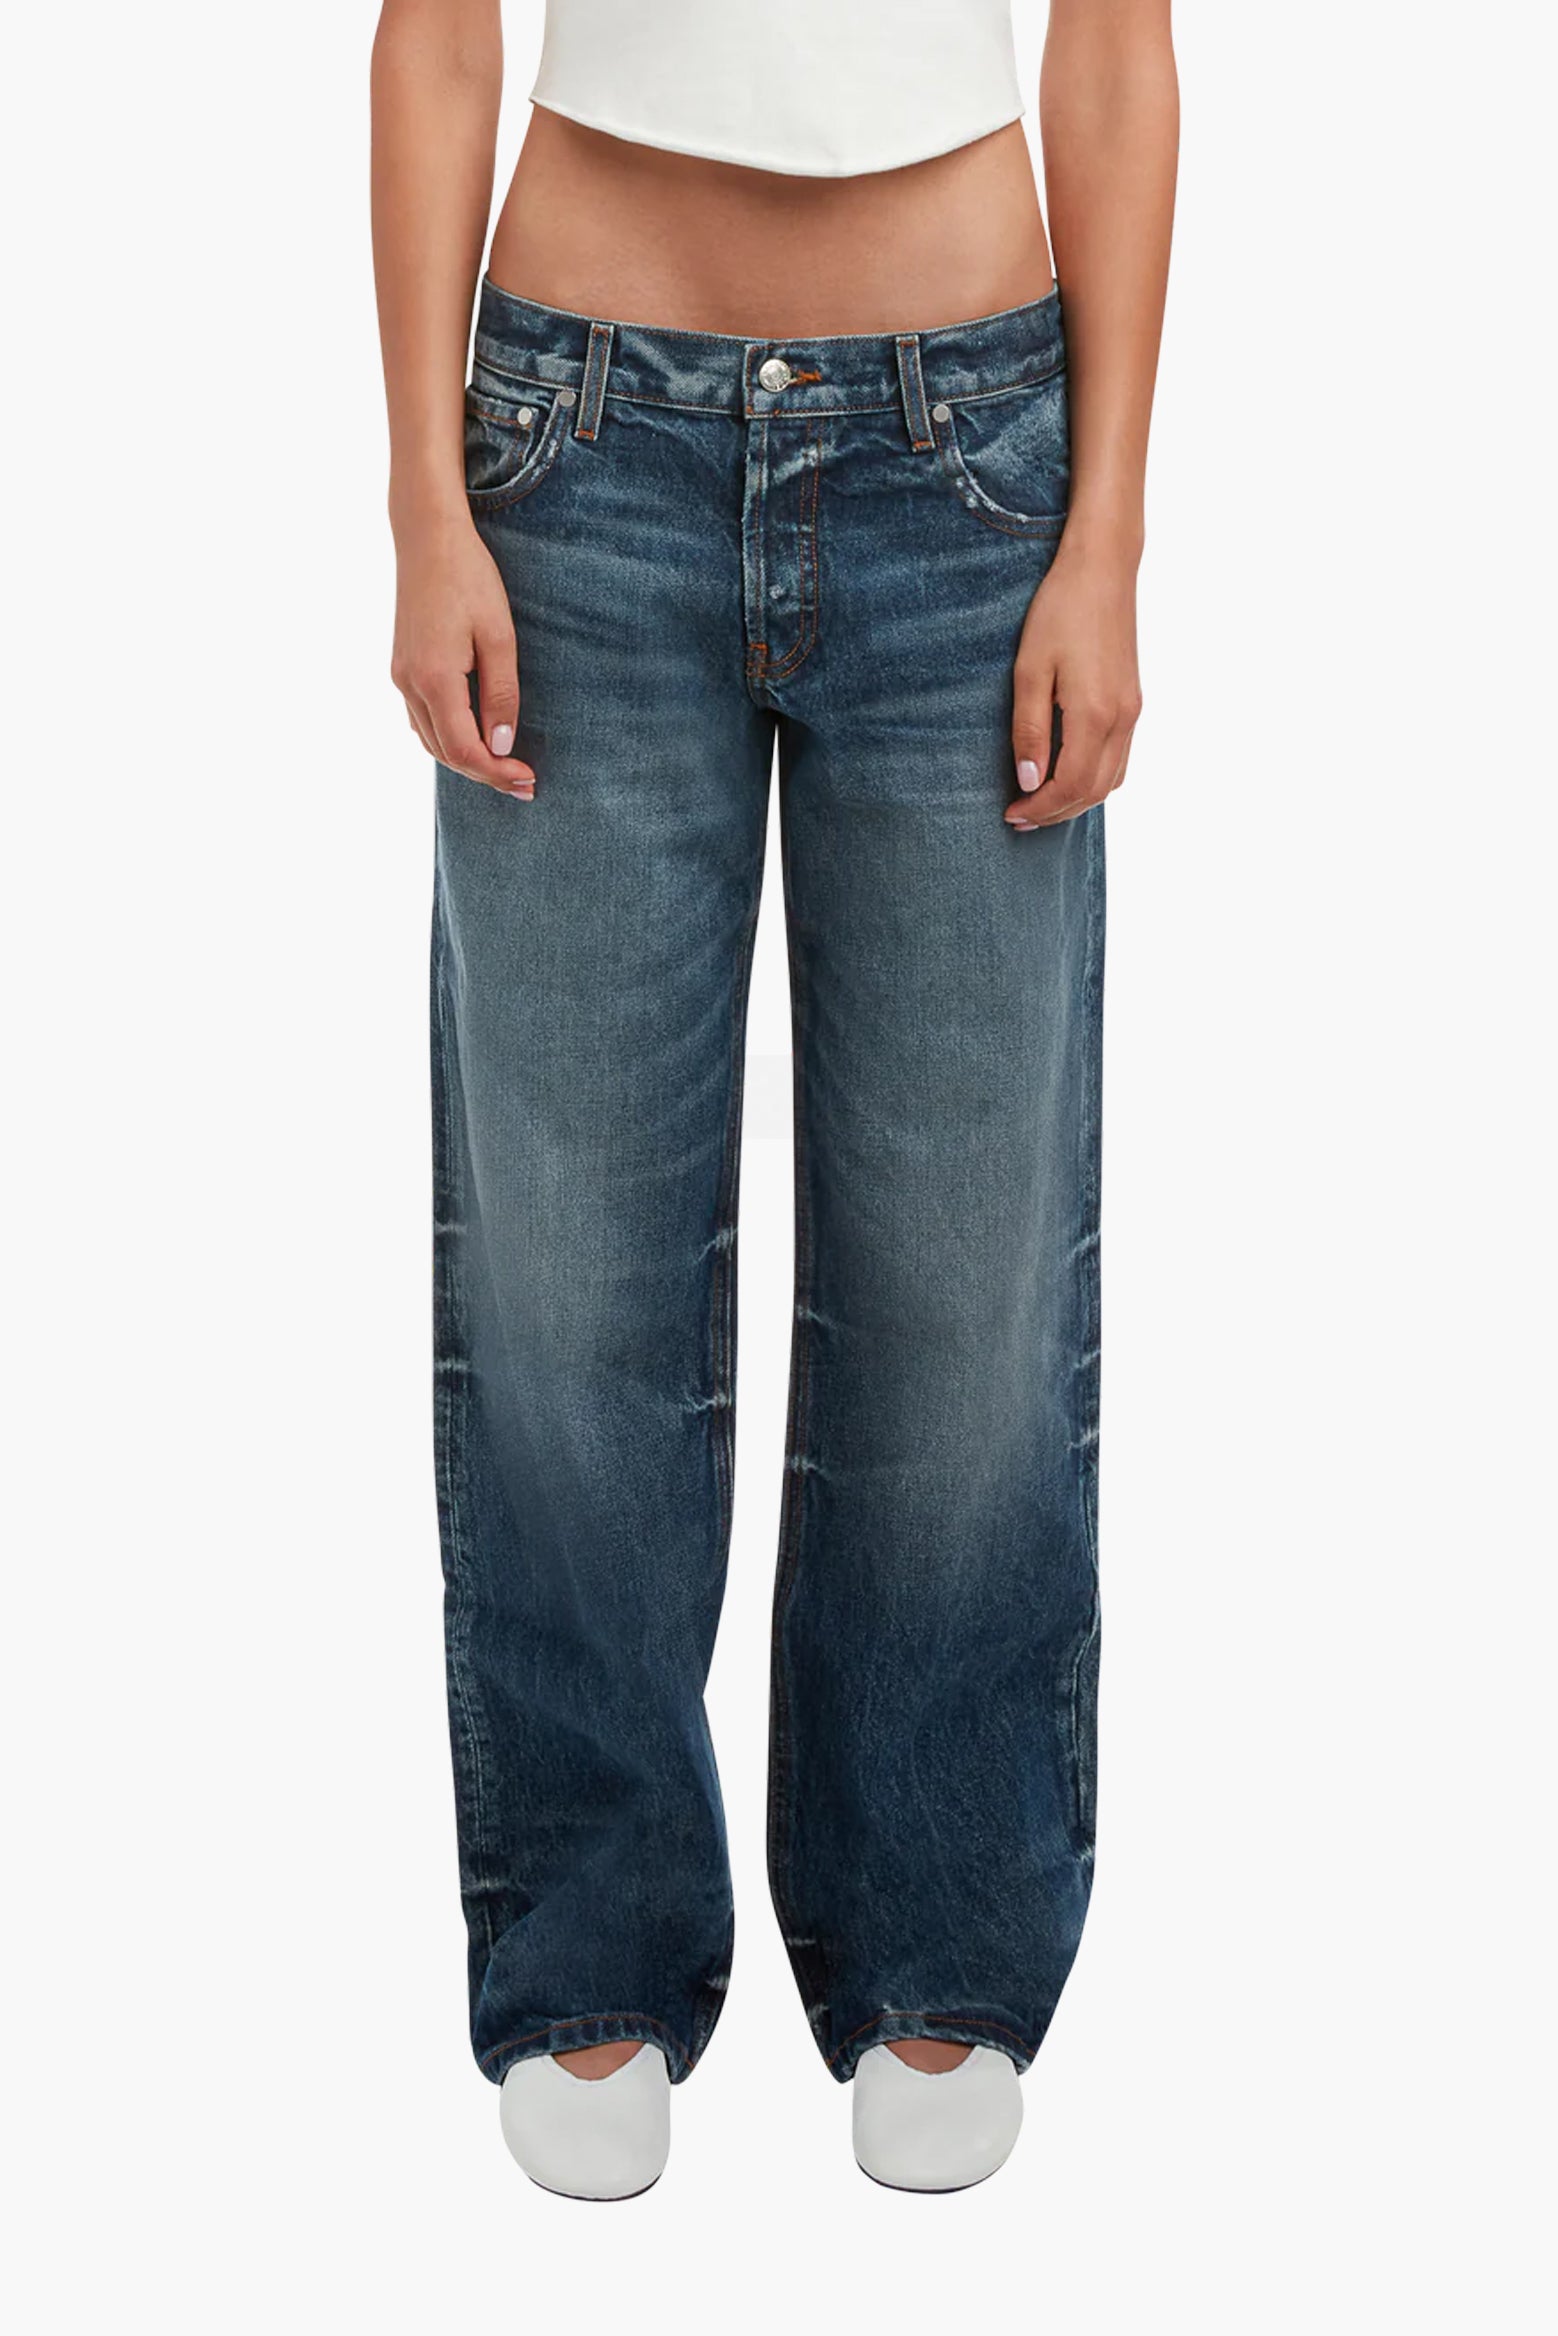 EB Denim Low Rise Baggy Jean in Tommy available at The New Trend Australia.